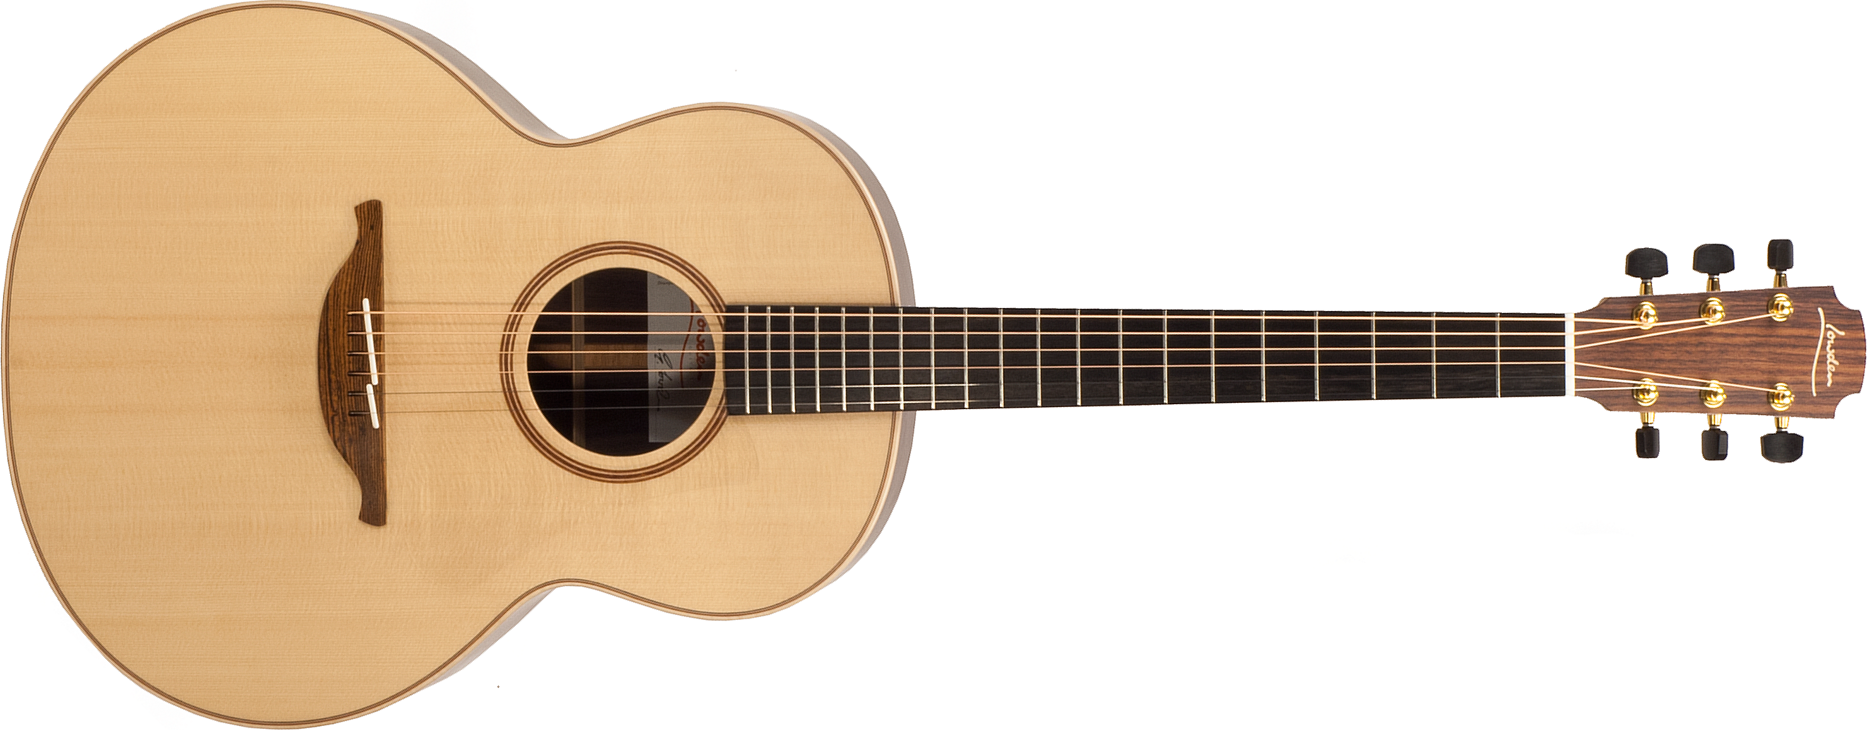 Lowden F32 Ir/ss Auditorium Epicea Palissandre - Natural - Acoustic guitar & electro - Main picture